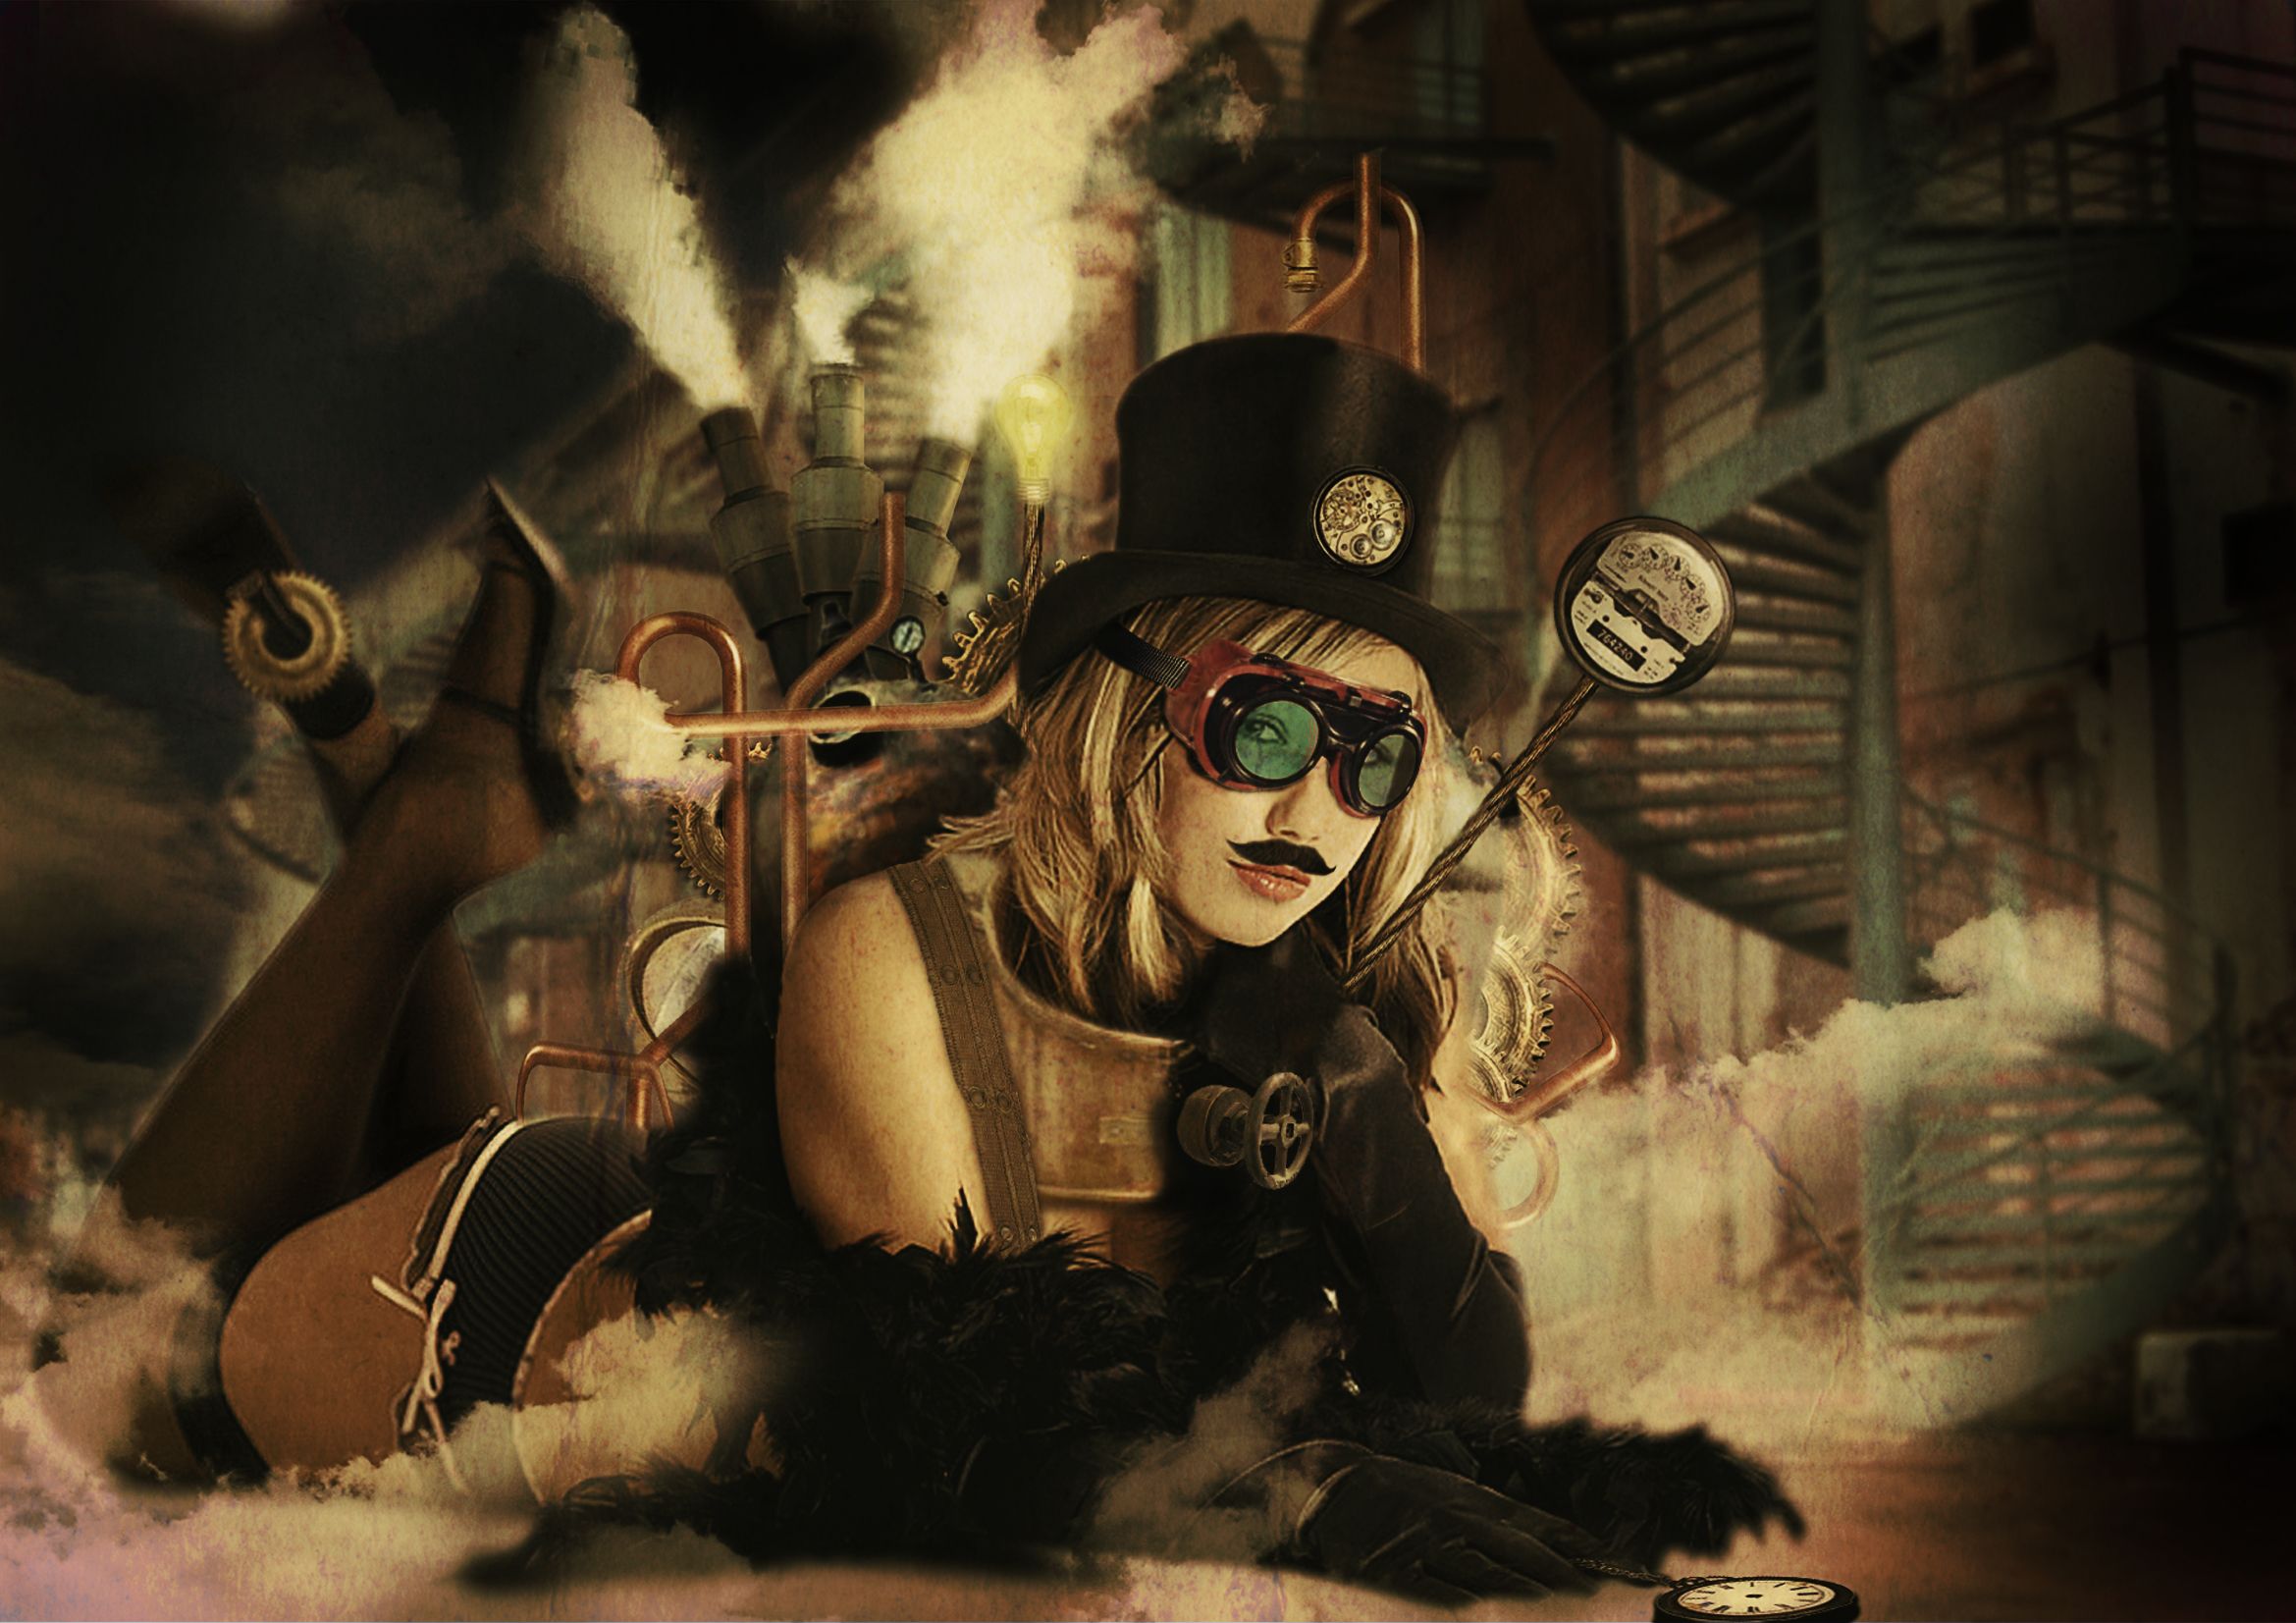 Free download Steampunk Girl Wallpaper Image Crazy Gallery